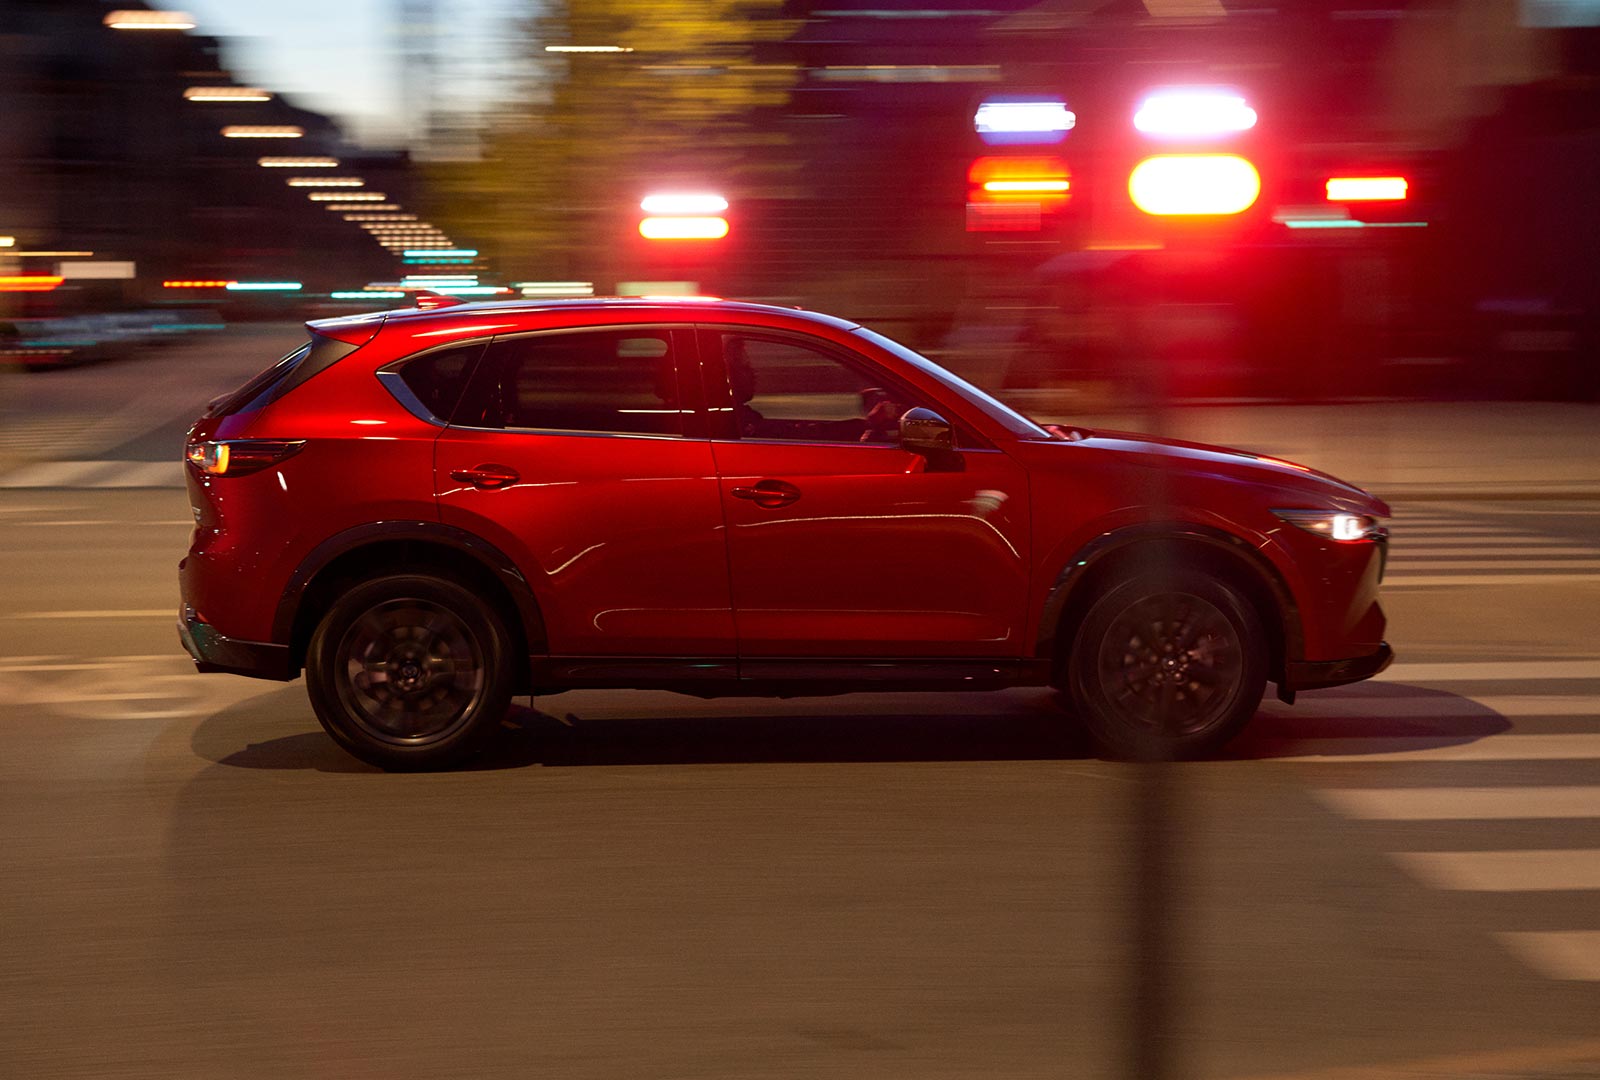 Soul Red Crystal Metallic Mazda CX-5 crosses intersection with blurred traffic lights at twilight.